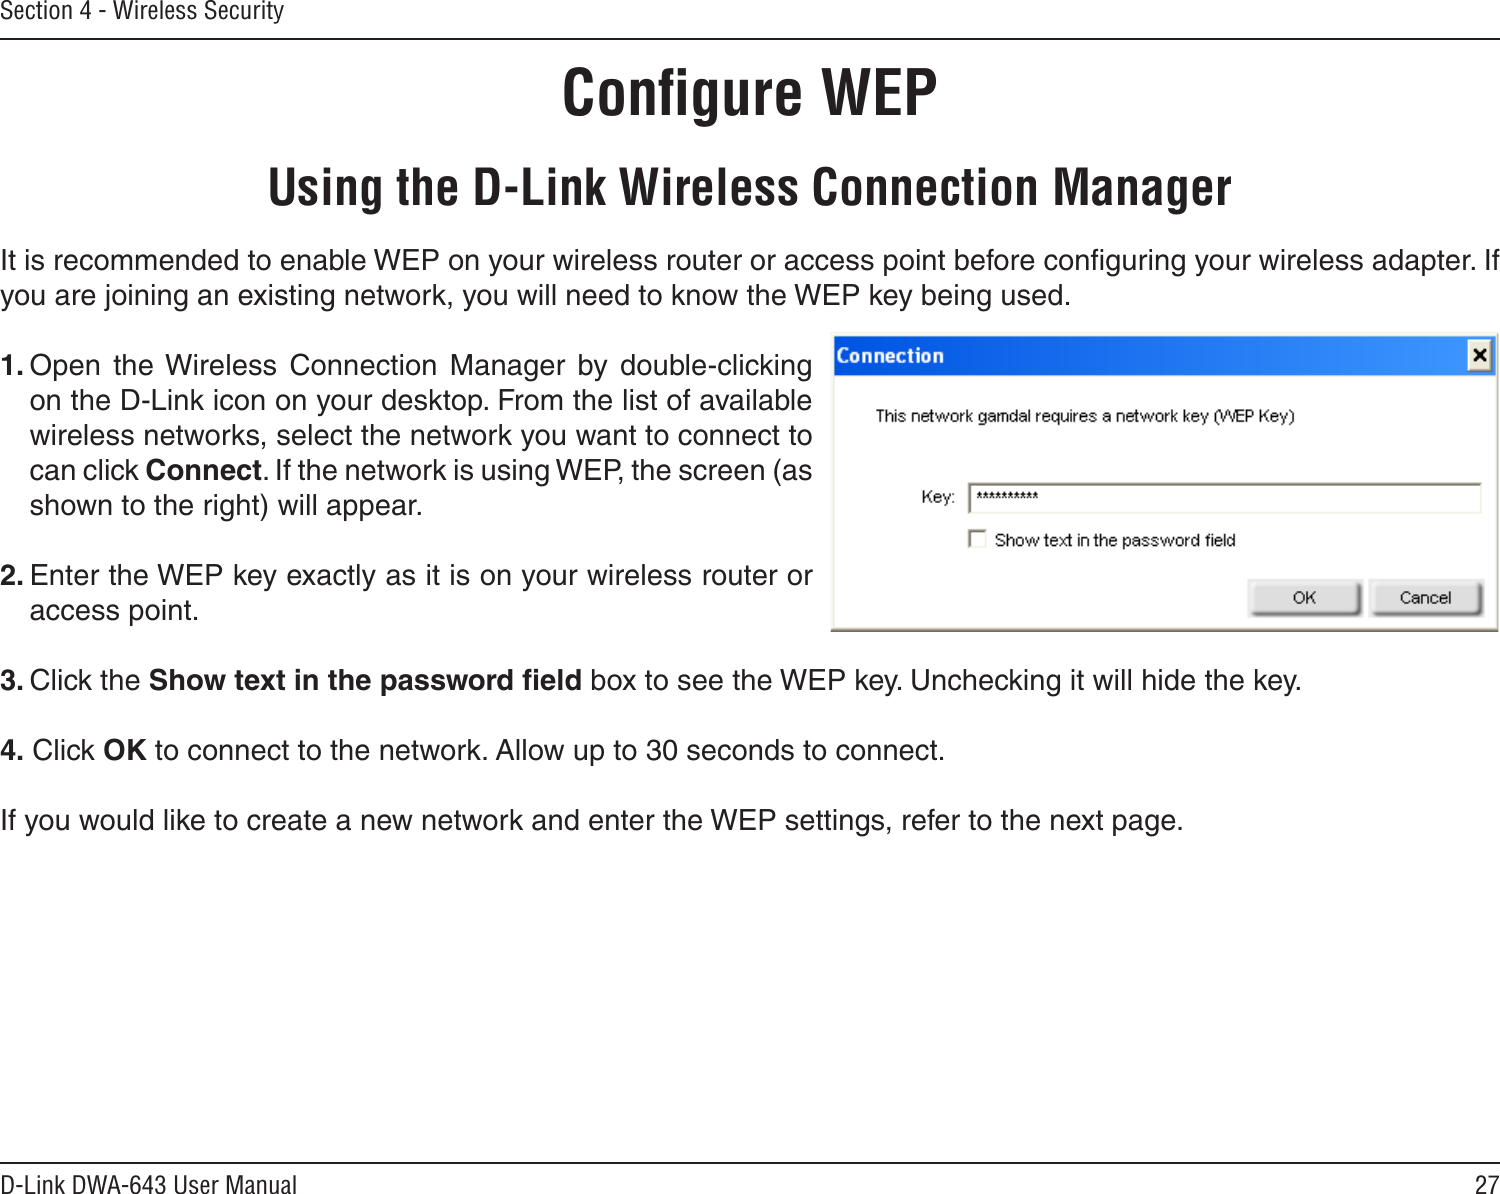 27D-Link DWA-643 User ManualSection 4 - Wireless SecurityConﬁgure WEPUsing the D-Link Wireless Connection ManagerIt is recommended to enable WEP on your wireless router or access point before conﬁguring your wireless adapter. If you are joining an existing network, you will need to know the WEP key being used.1. Open  the Wireless  Connection  Manager  by  double-clicking on the D-Link icon on your desktop. From the list of available wireless networks, select the network you want to connect to can click Connect. If the network is using WEP, the screen (as shown to the right) will appear. 2. Enter the WEP key exactly as it is on your wireless router or access point.3. Click the Show text in the password ﬁeld box to see the WEP key. Unchecking it will hide the key.4. Click OK to connect to the network. Allow up to 30 seconds to connect. If you would like to create a new network and enter the WEP settings, refer to the next page.